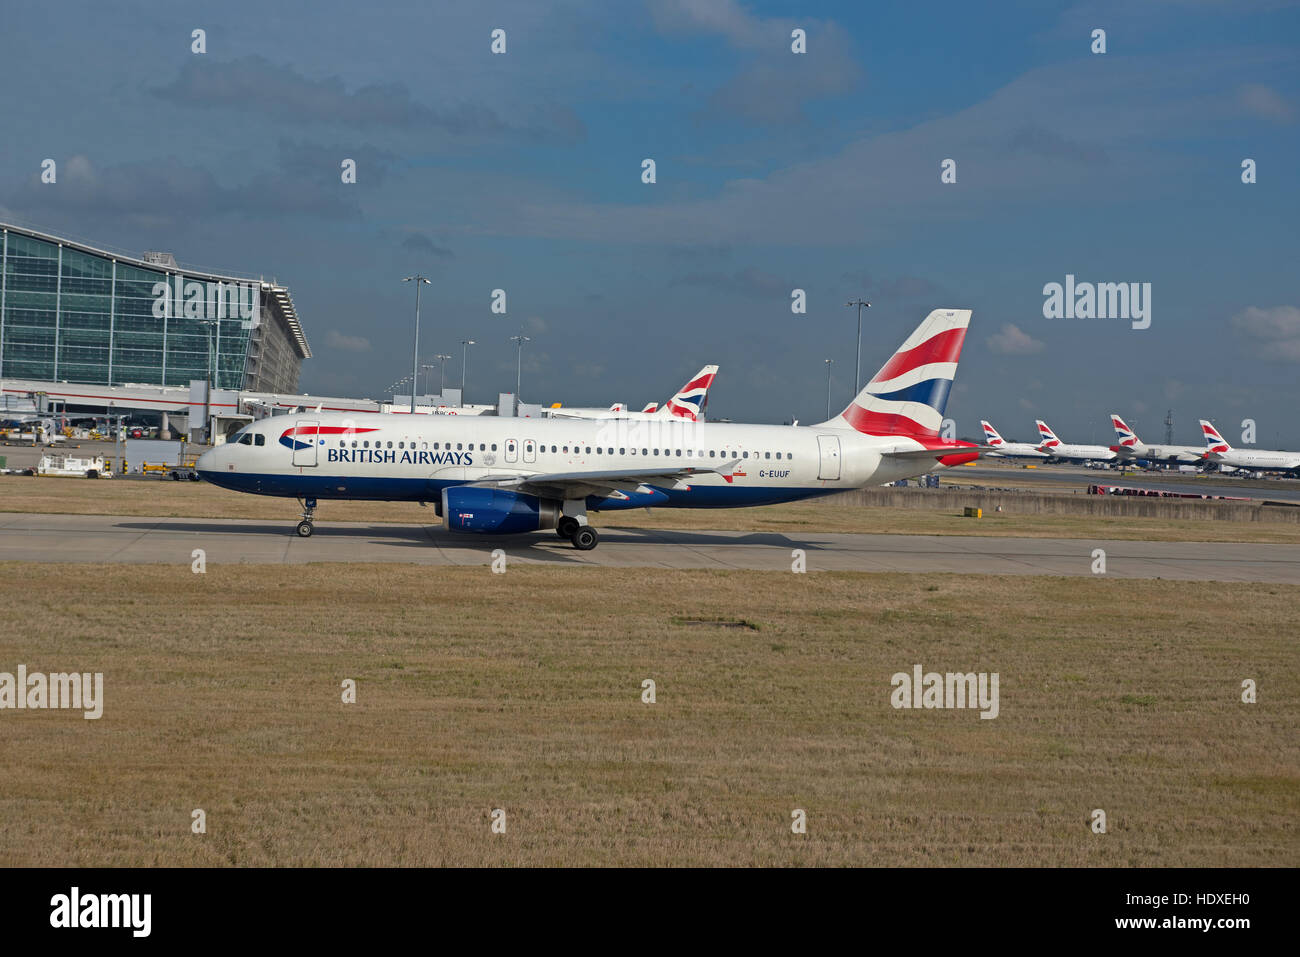 British Airways aircraft parked outside terminal 2 at Heathrow Airport London UK  SCO 11,277. Stock Photo